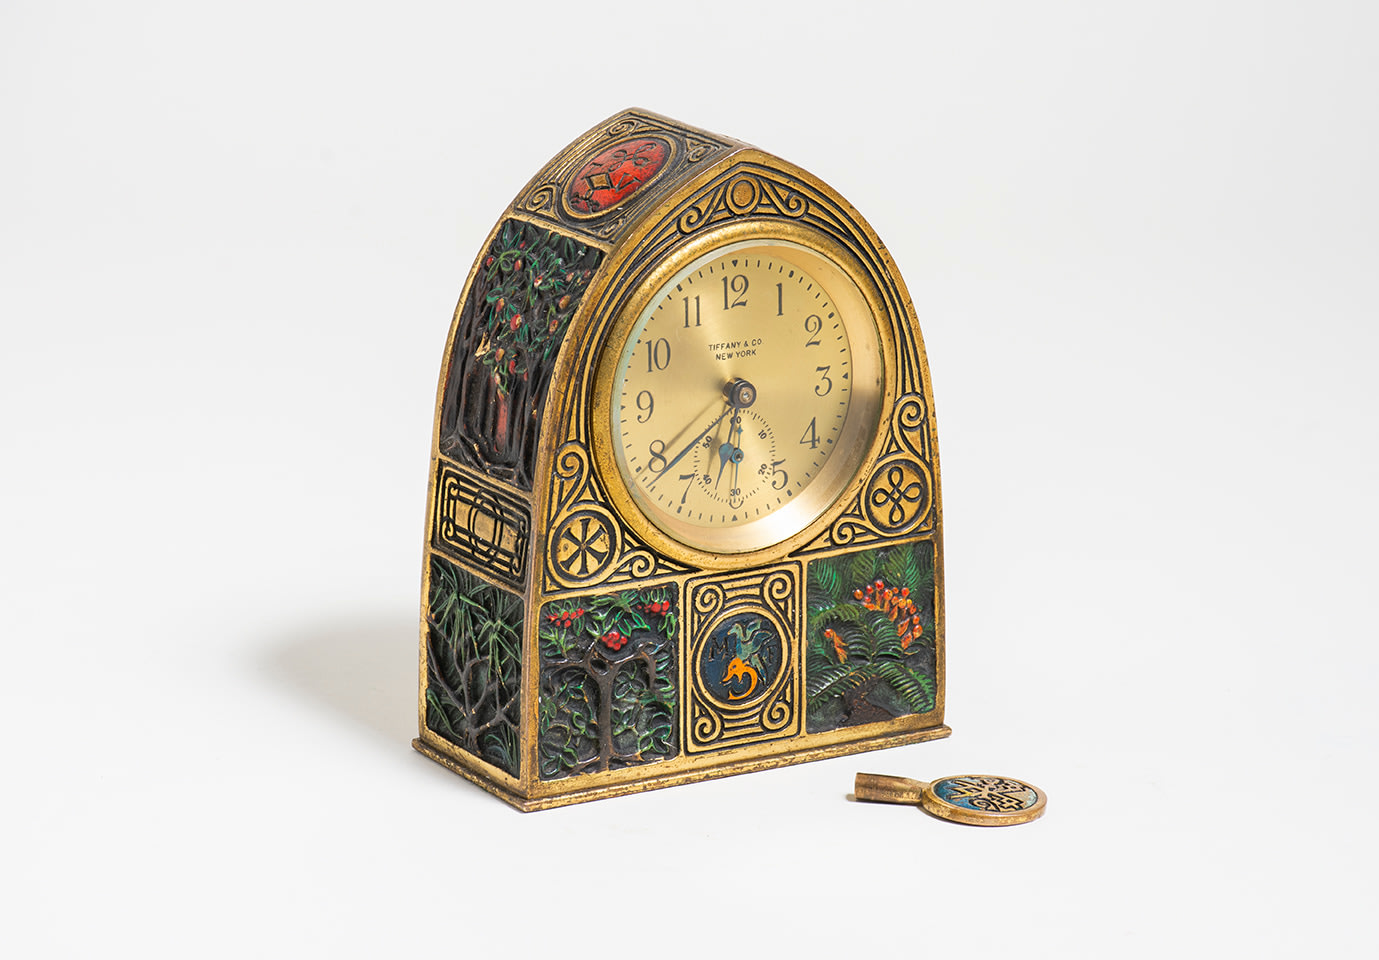 a desk clock with rectangular base and pointed top, the round clock face marked TIFFANY &amp; CO, from the &quot;Bookmark&quot; Desk set produced by Tiffany Studios around 1910, in gilt bronze with areas of sculptural depiction in relief of stylized monograms and natural motifs like palm trees, pine needs meant to represent Renaissance printer's marks